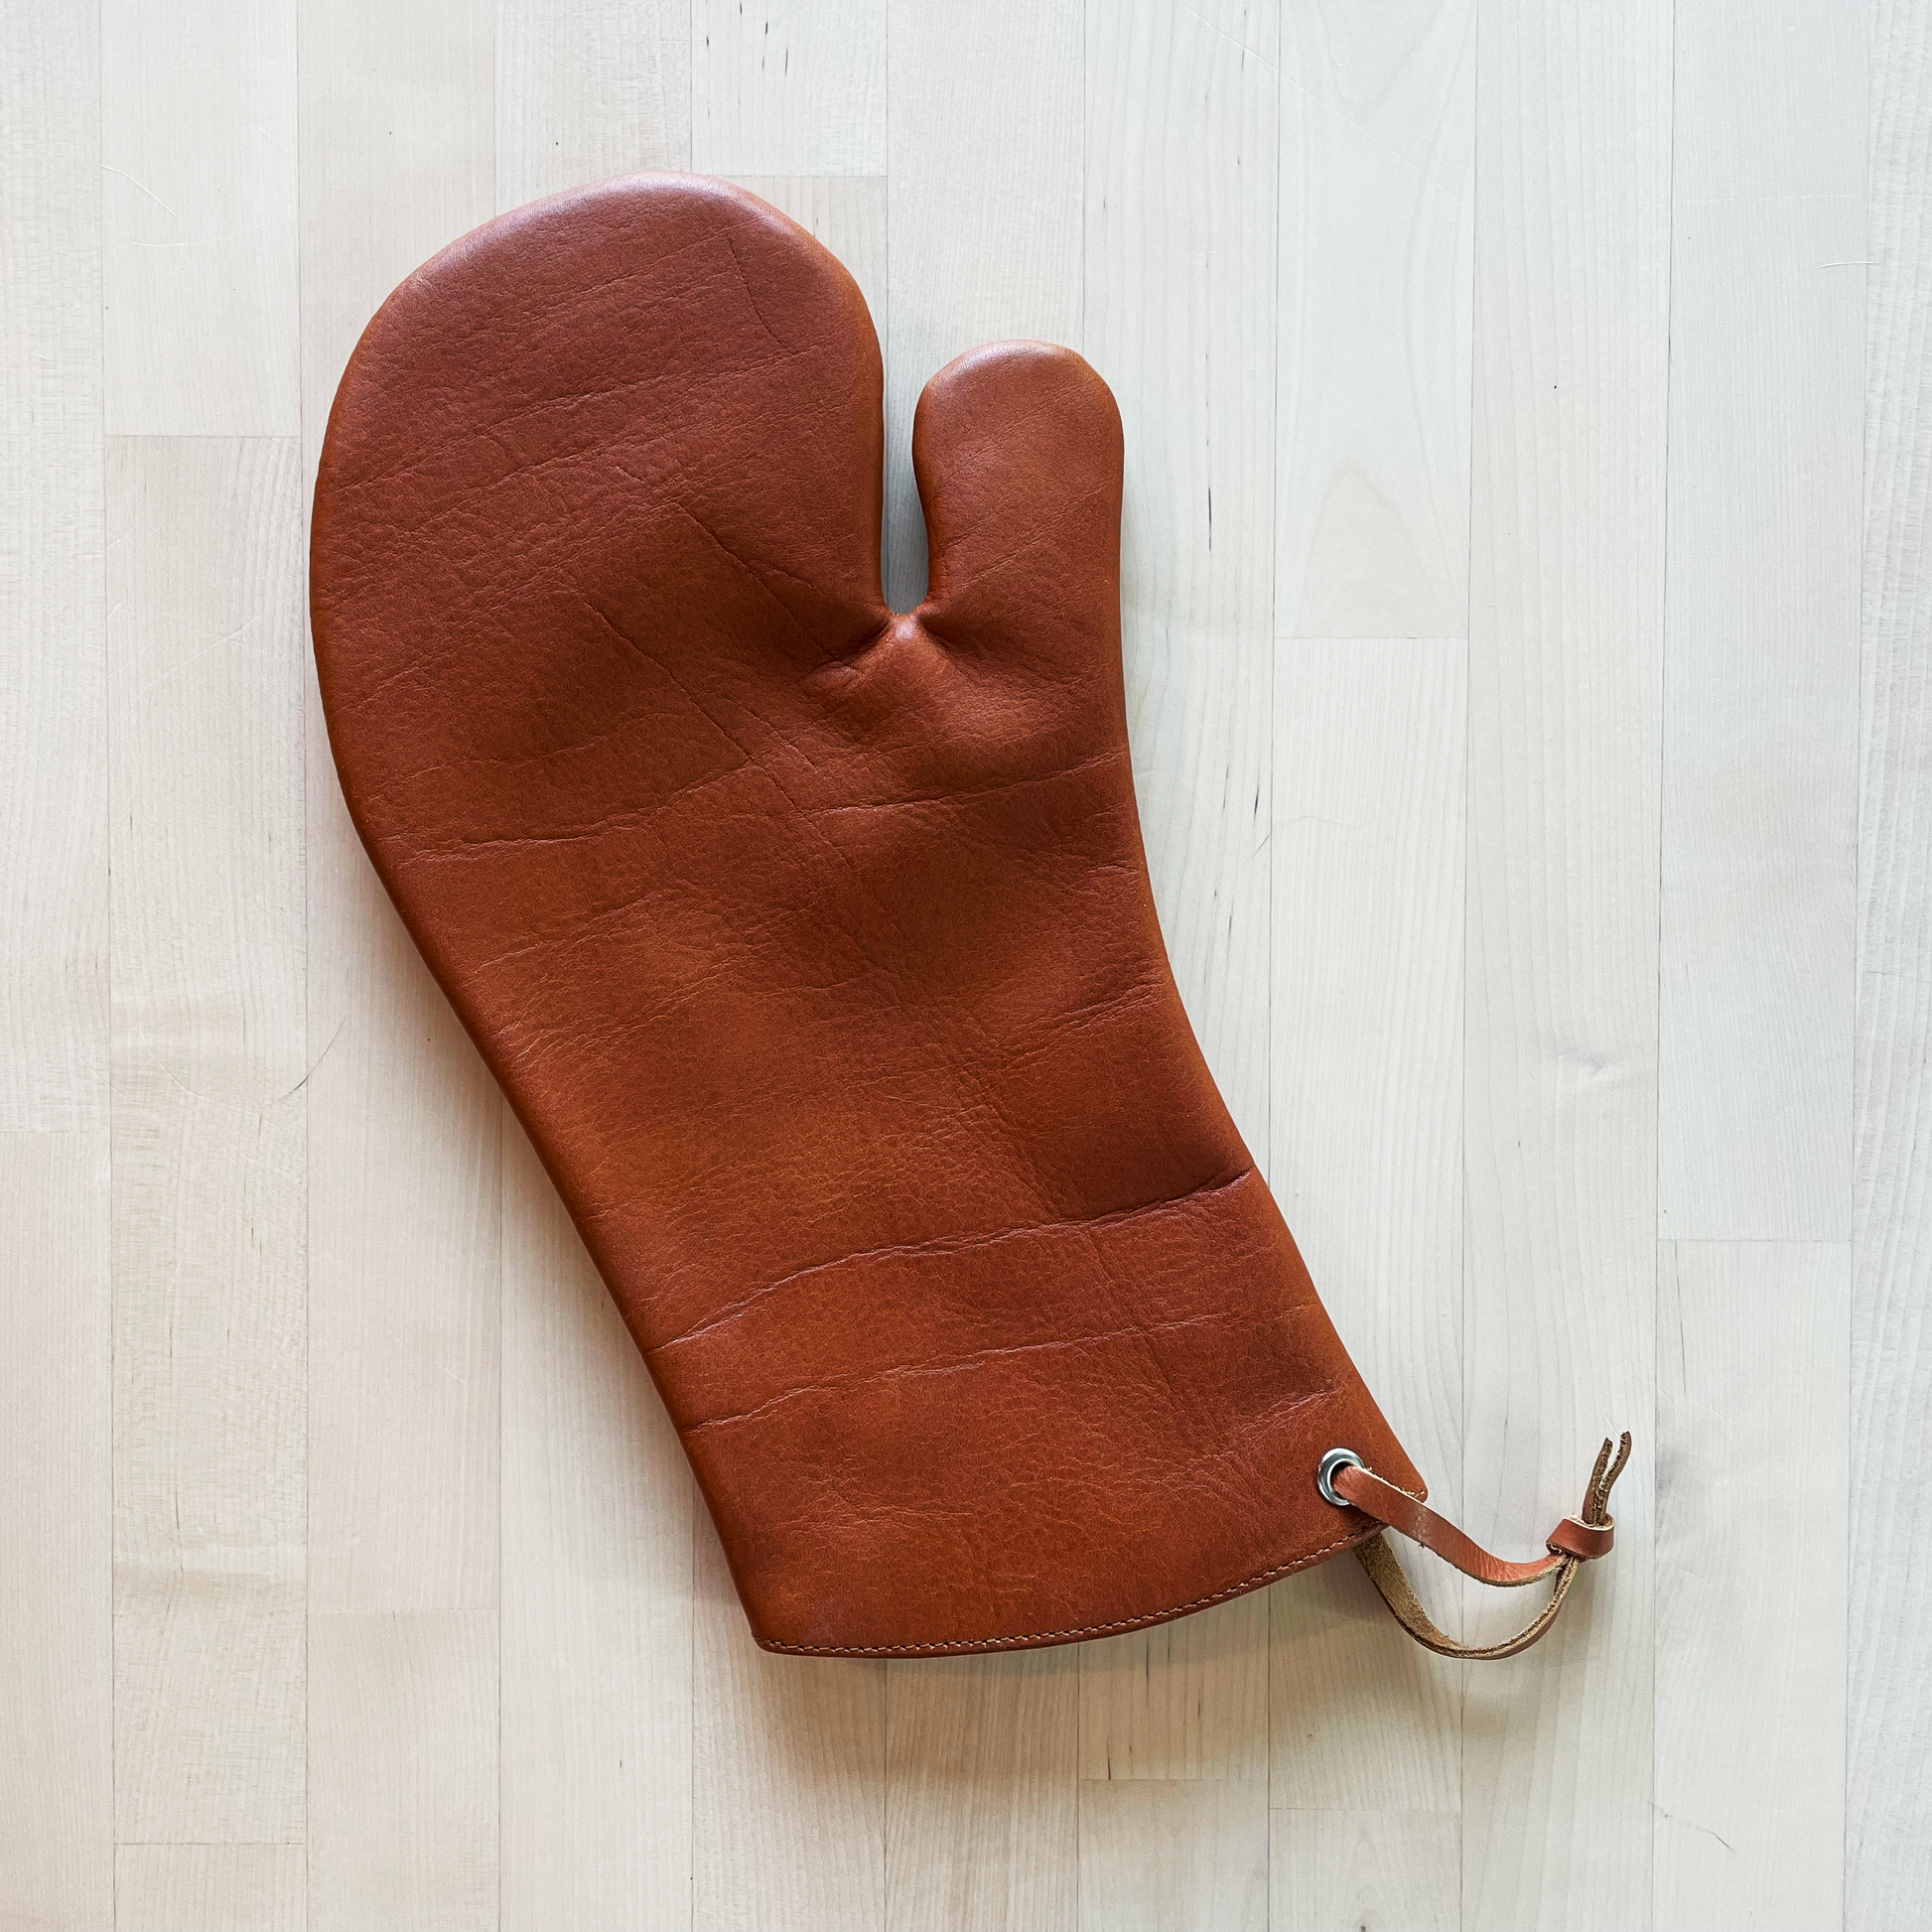 Leather Oven Mitts ᐈ Buy Leather Oven Mitts online